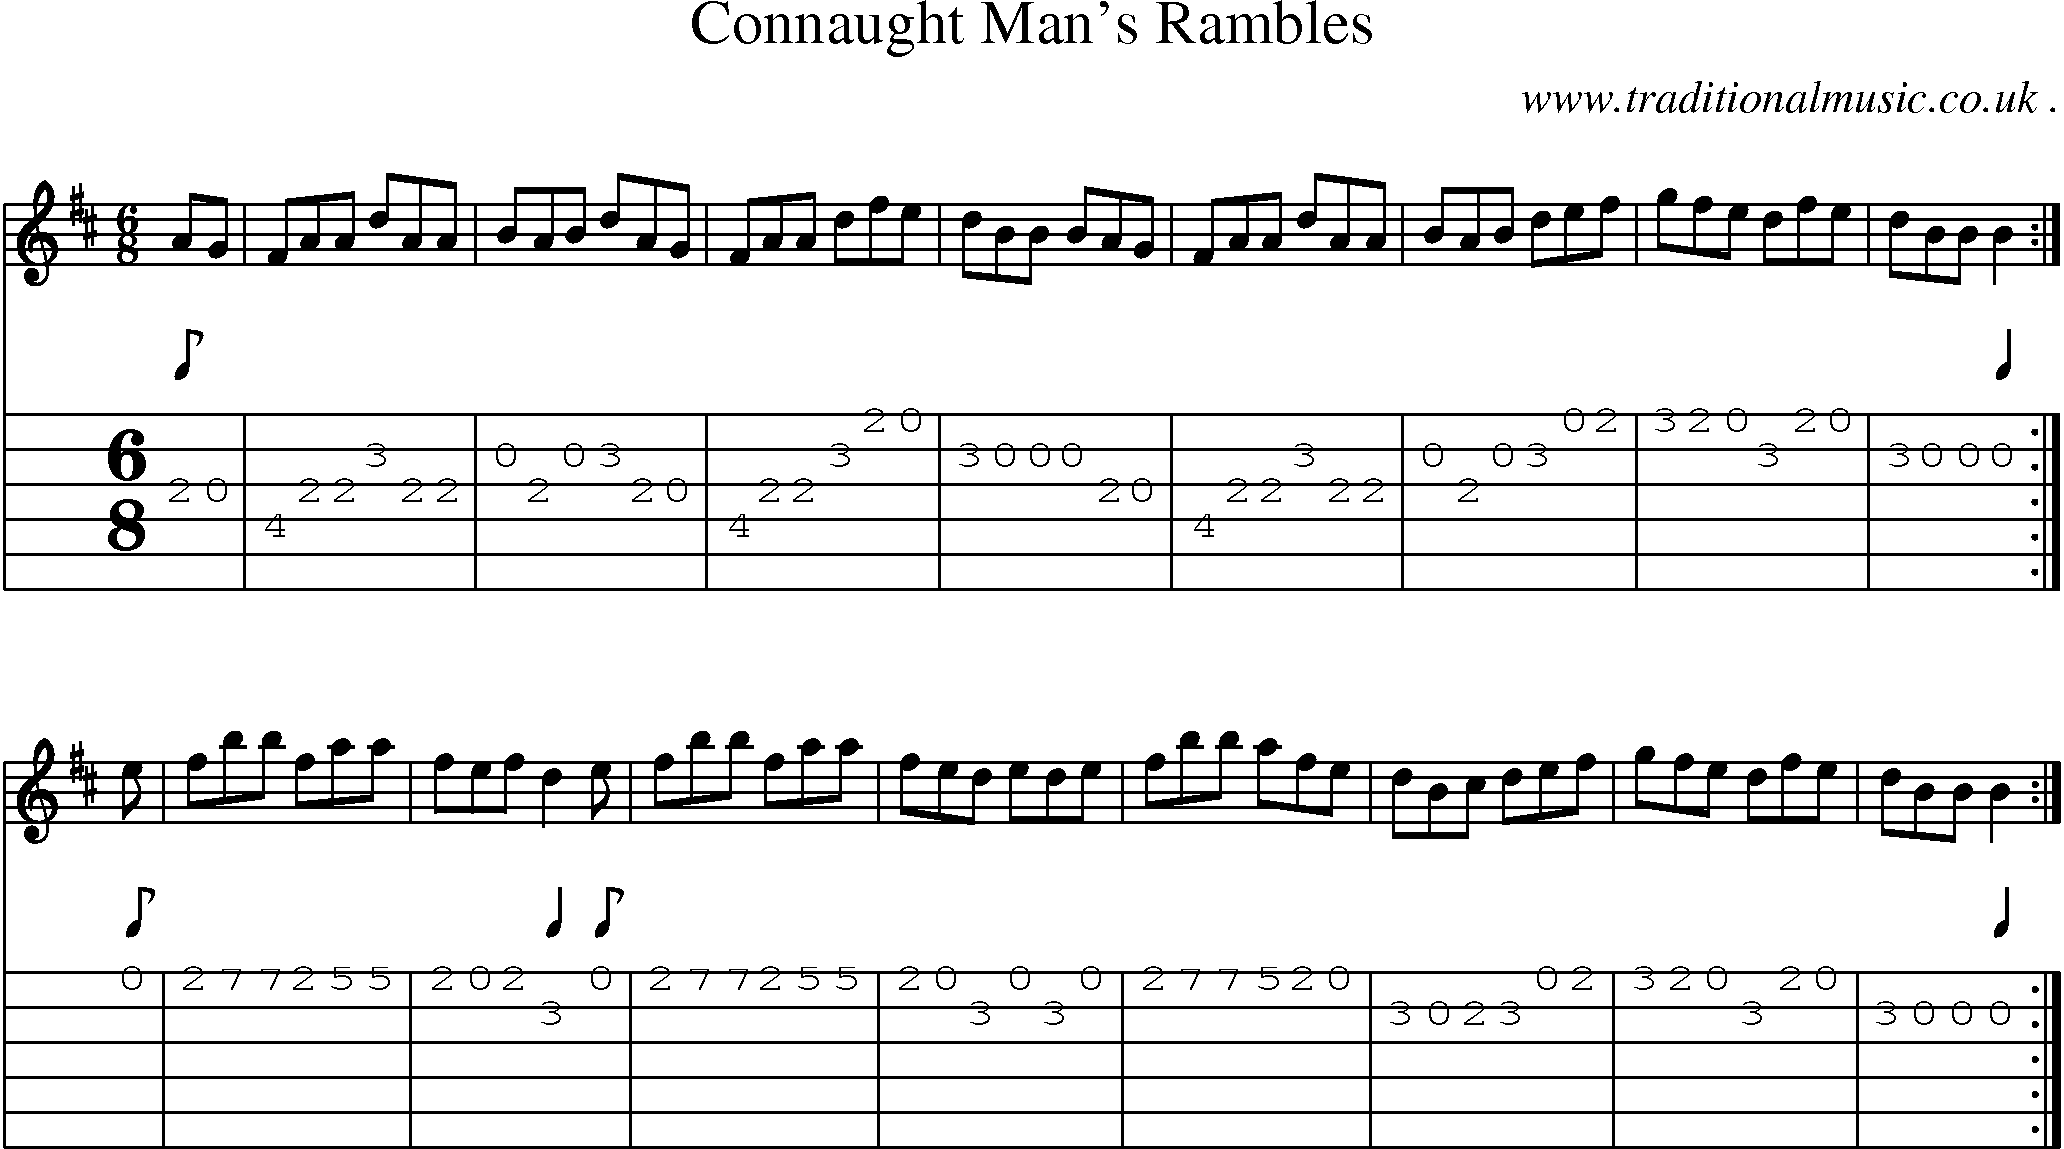 Sheet-Music and Guitar Tabs for Connaught Mans Rambles